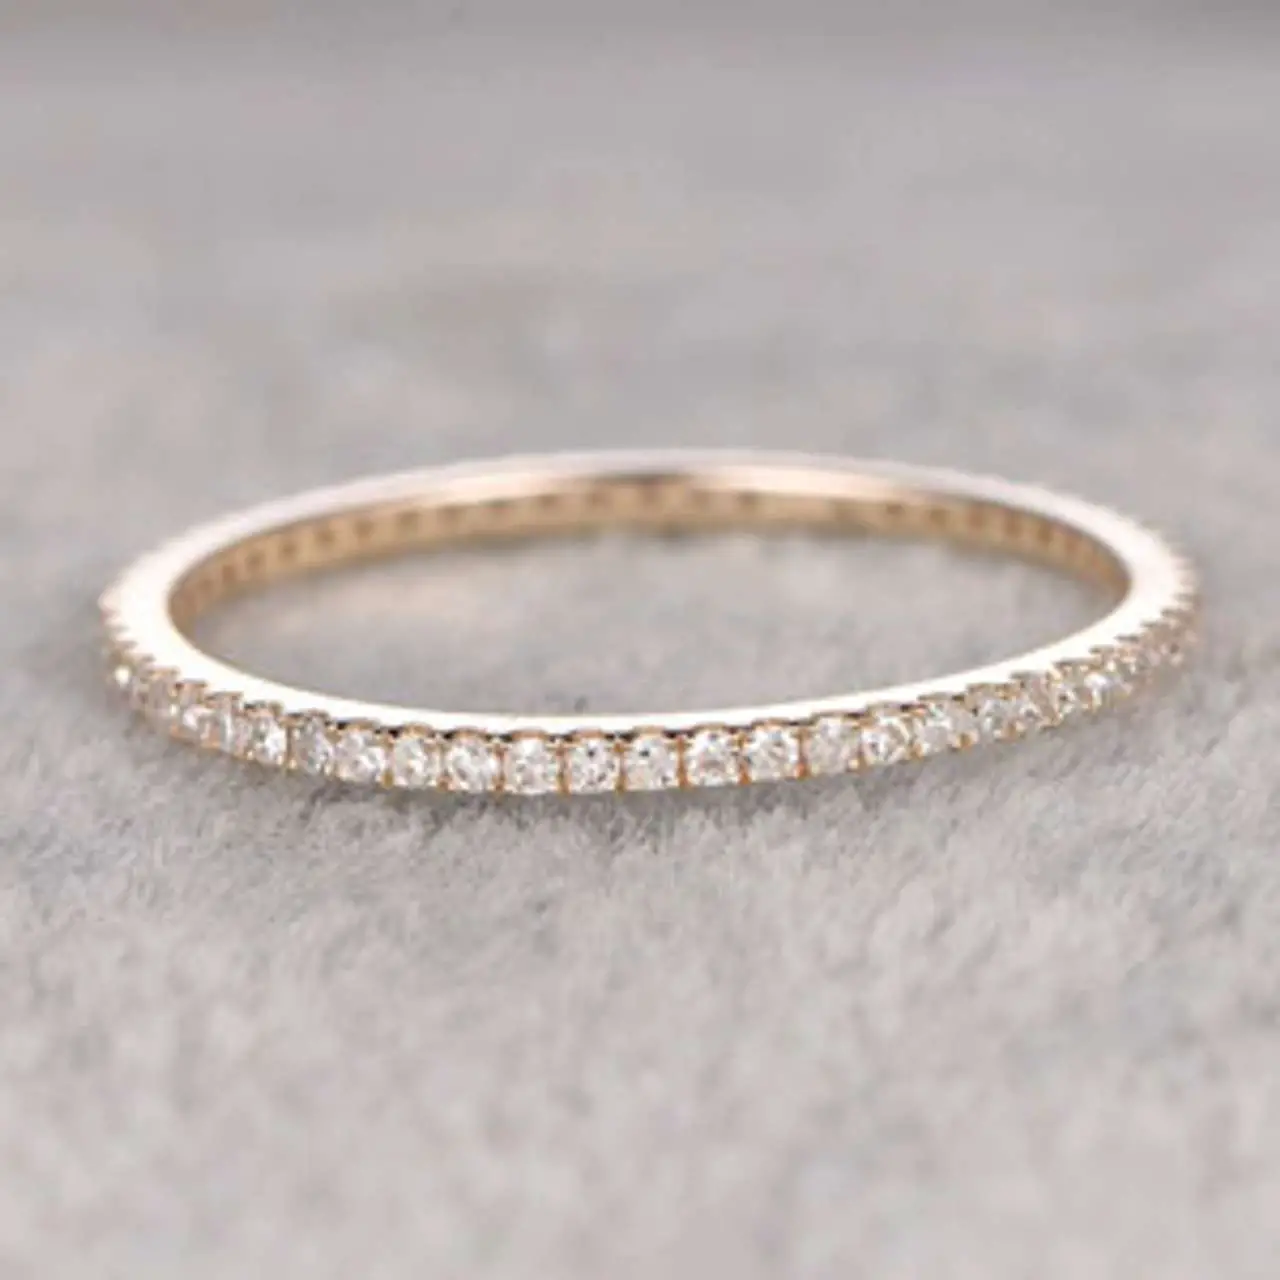 Diamond Wedding Rings For Her 14k Yellow Gold Thin Pave Full Eternity ...